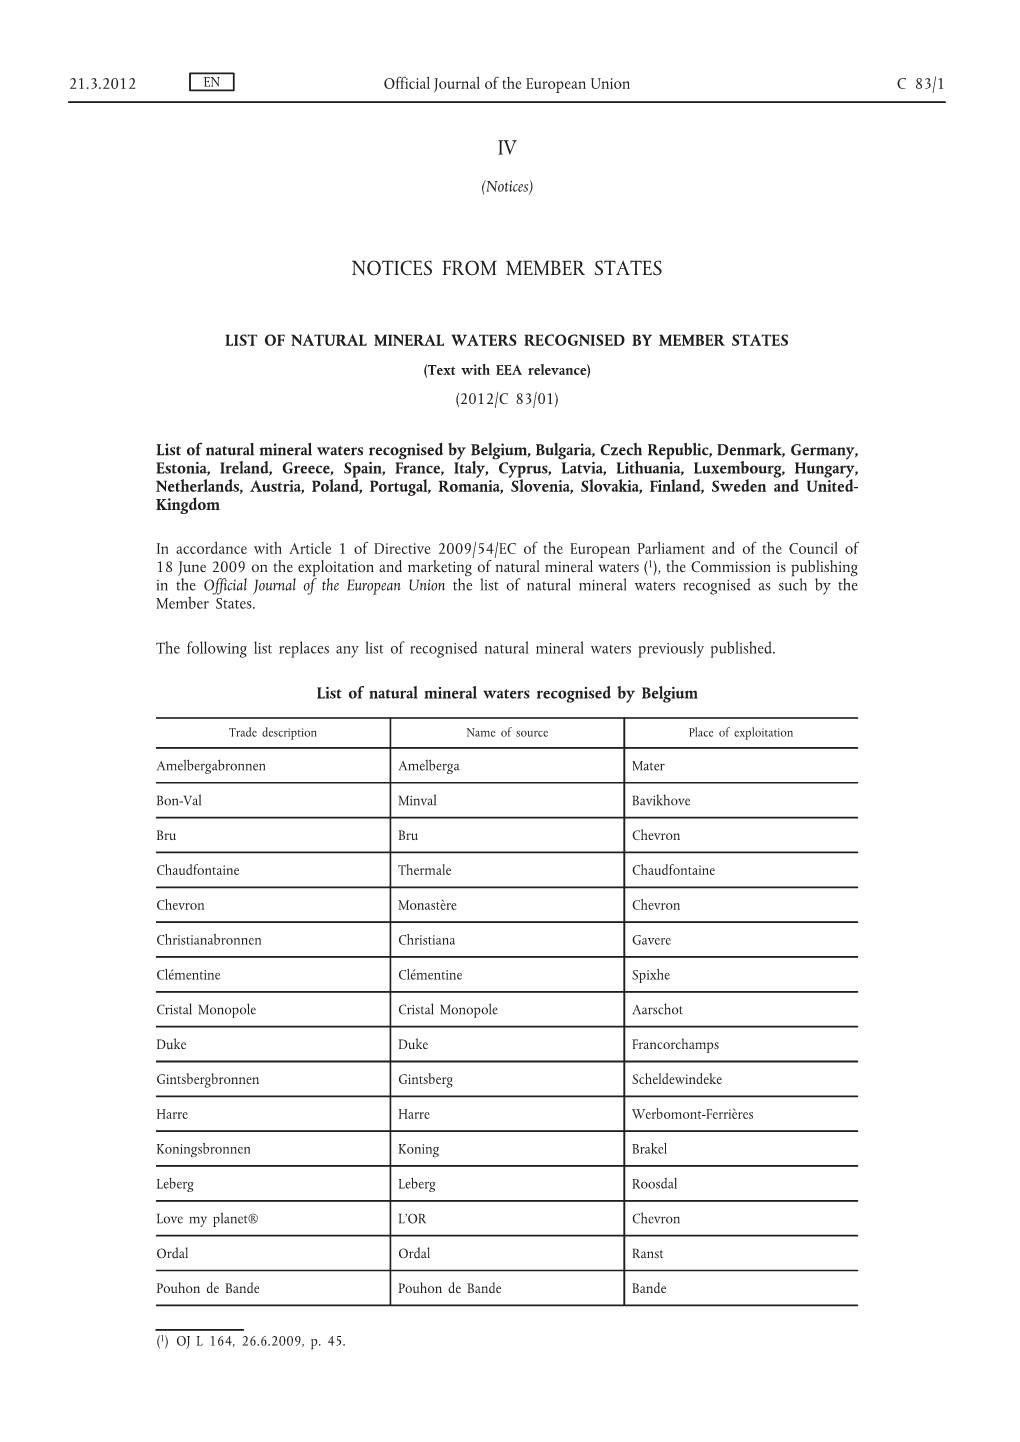 LIST of NATURAL MINERAL WATERS RECOGNISED by MEMBER STATES (Text with EEA Relevance) (2012/C 83/01)